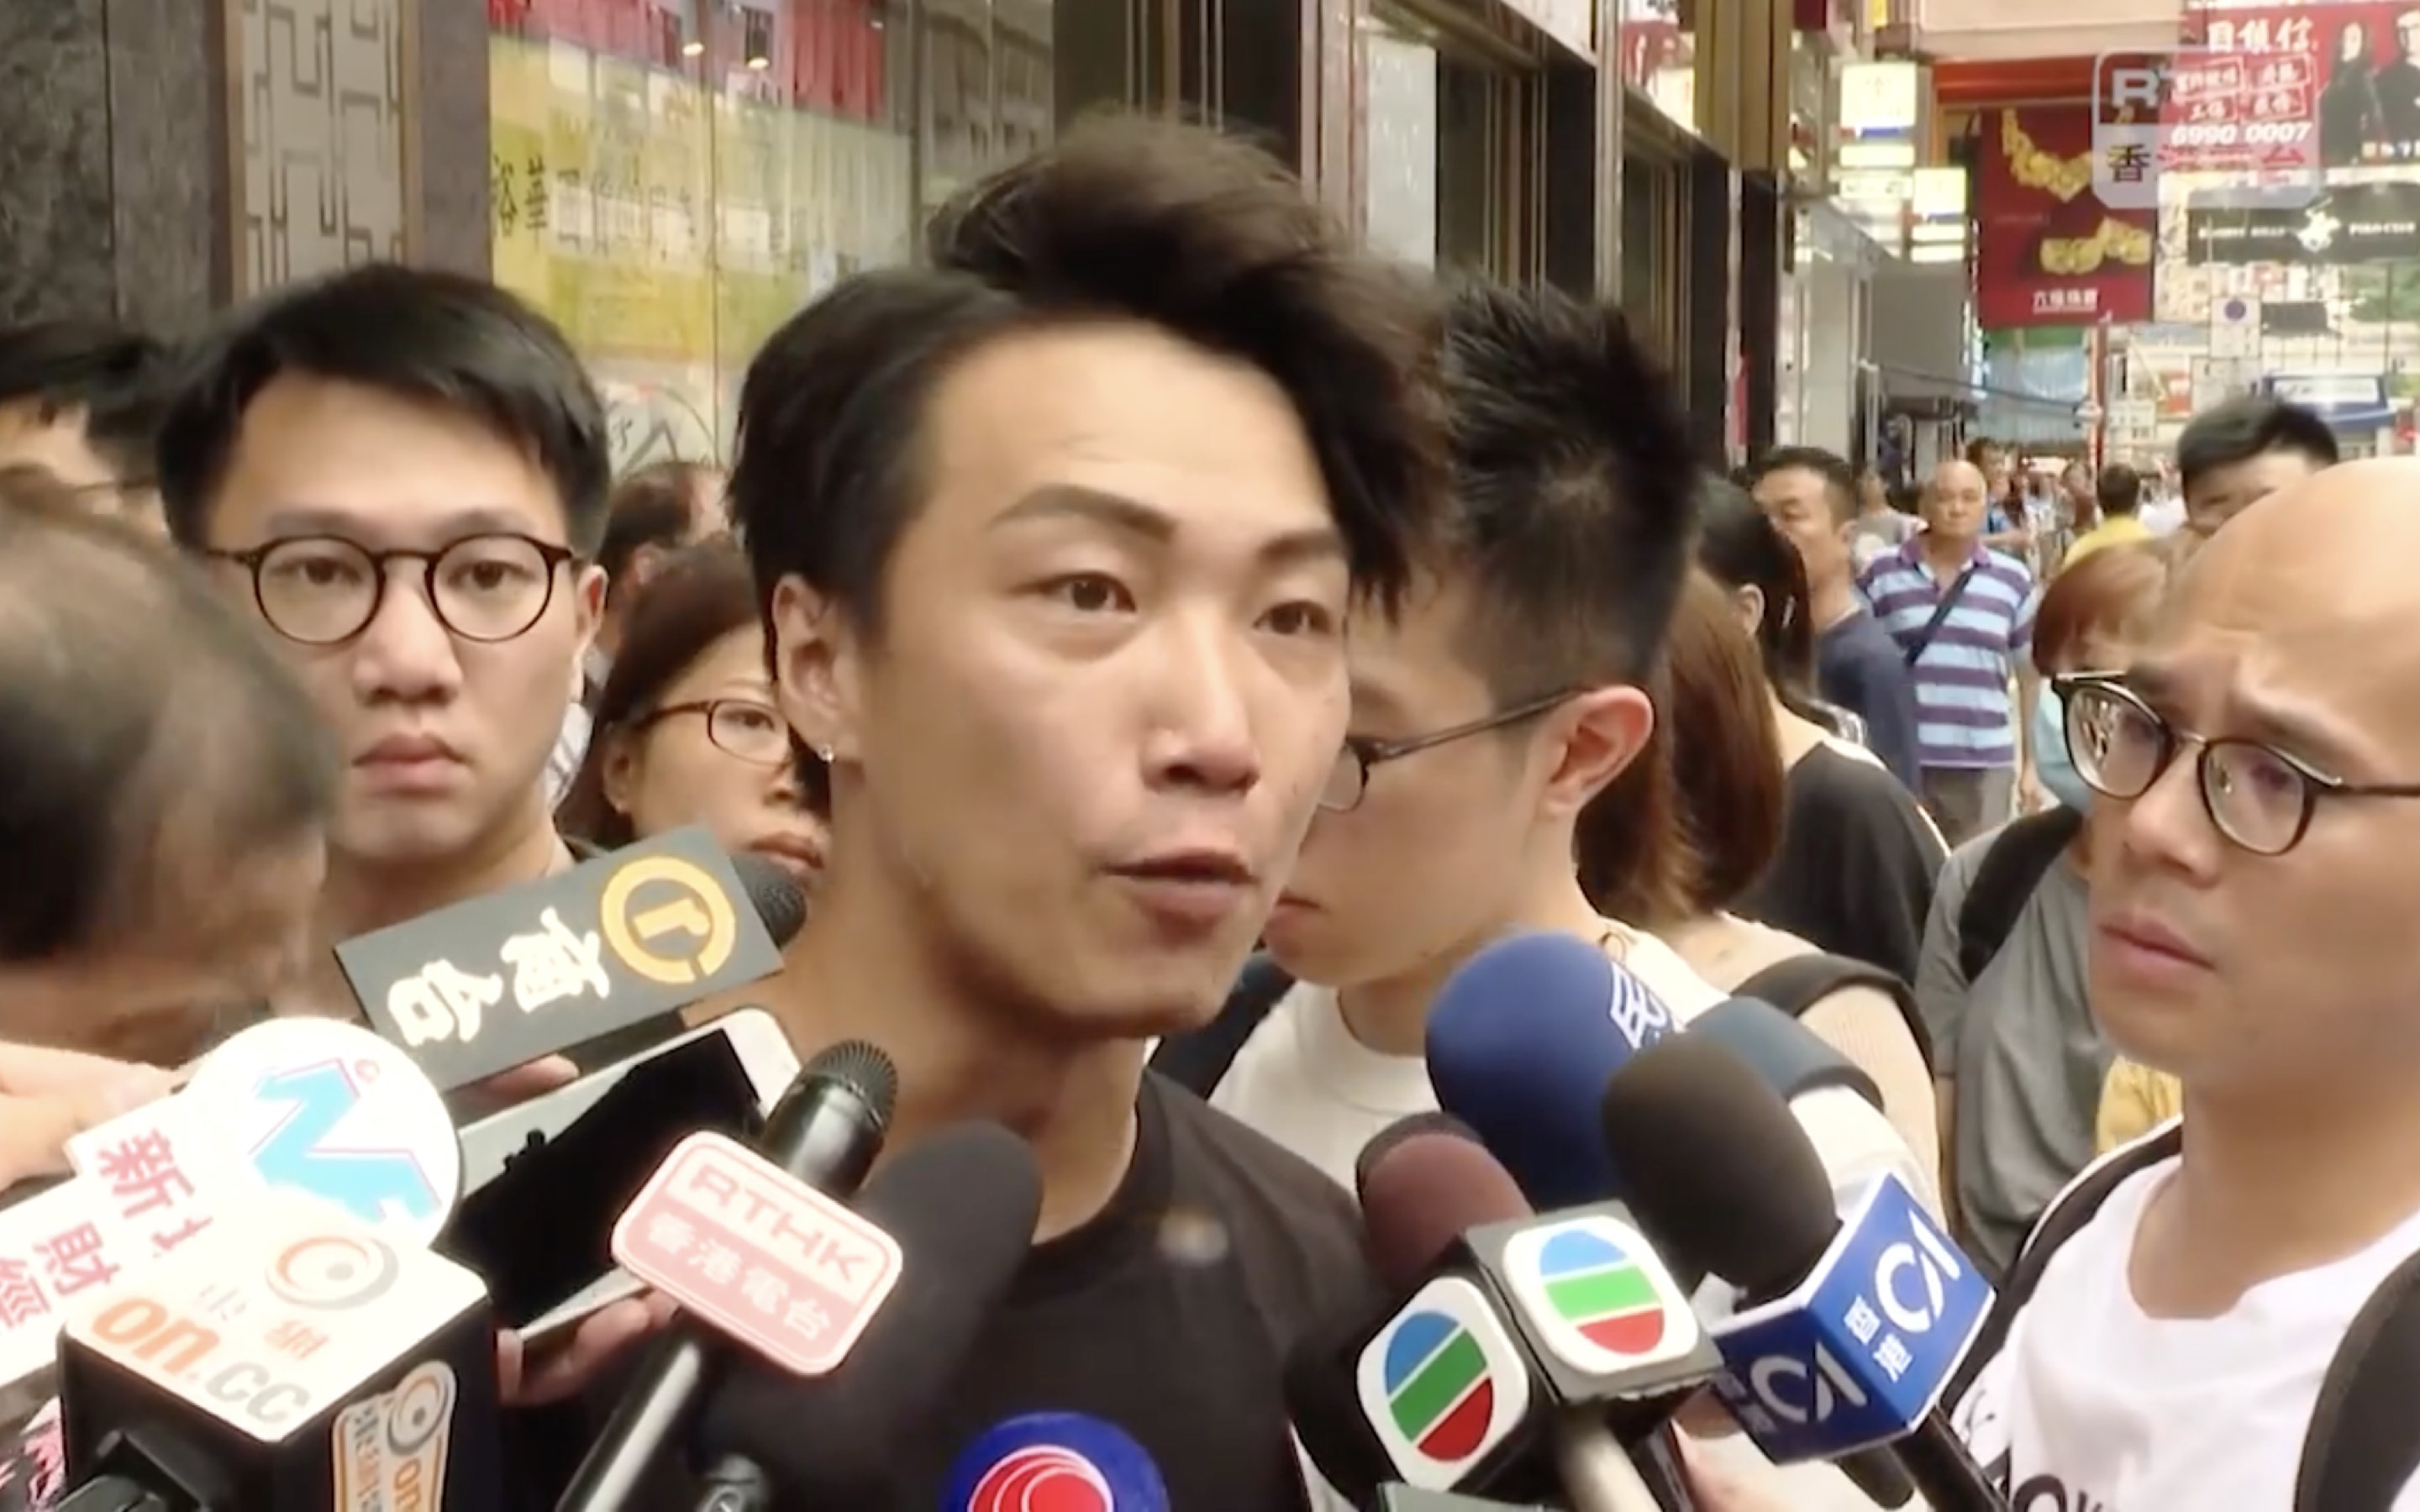 Jimmy Sham, the leader of the Civil Human Rights Front, addresses reporters shortly after police announced that they have issued a letter of objection for a rally on Saturday, August 31. Screengrab via Facebook/RTHK.